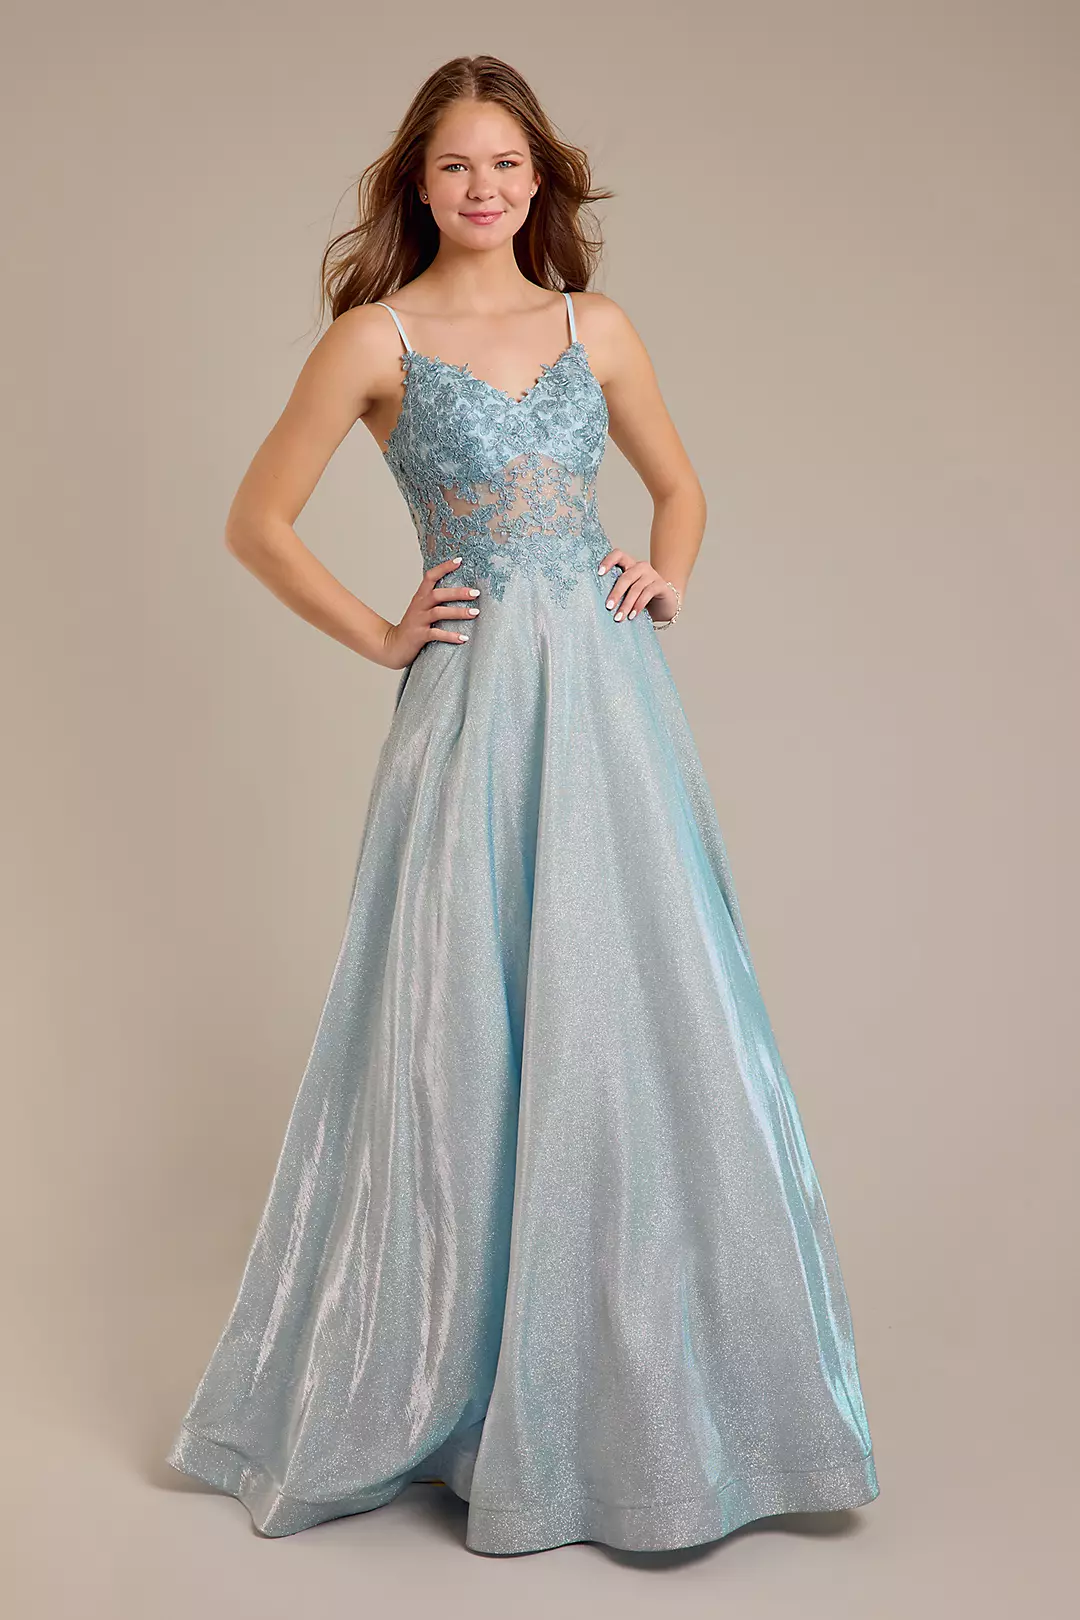 Iridescent Ball Gown with Illusion Lace Applique Image